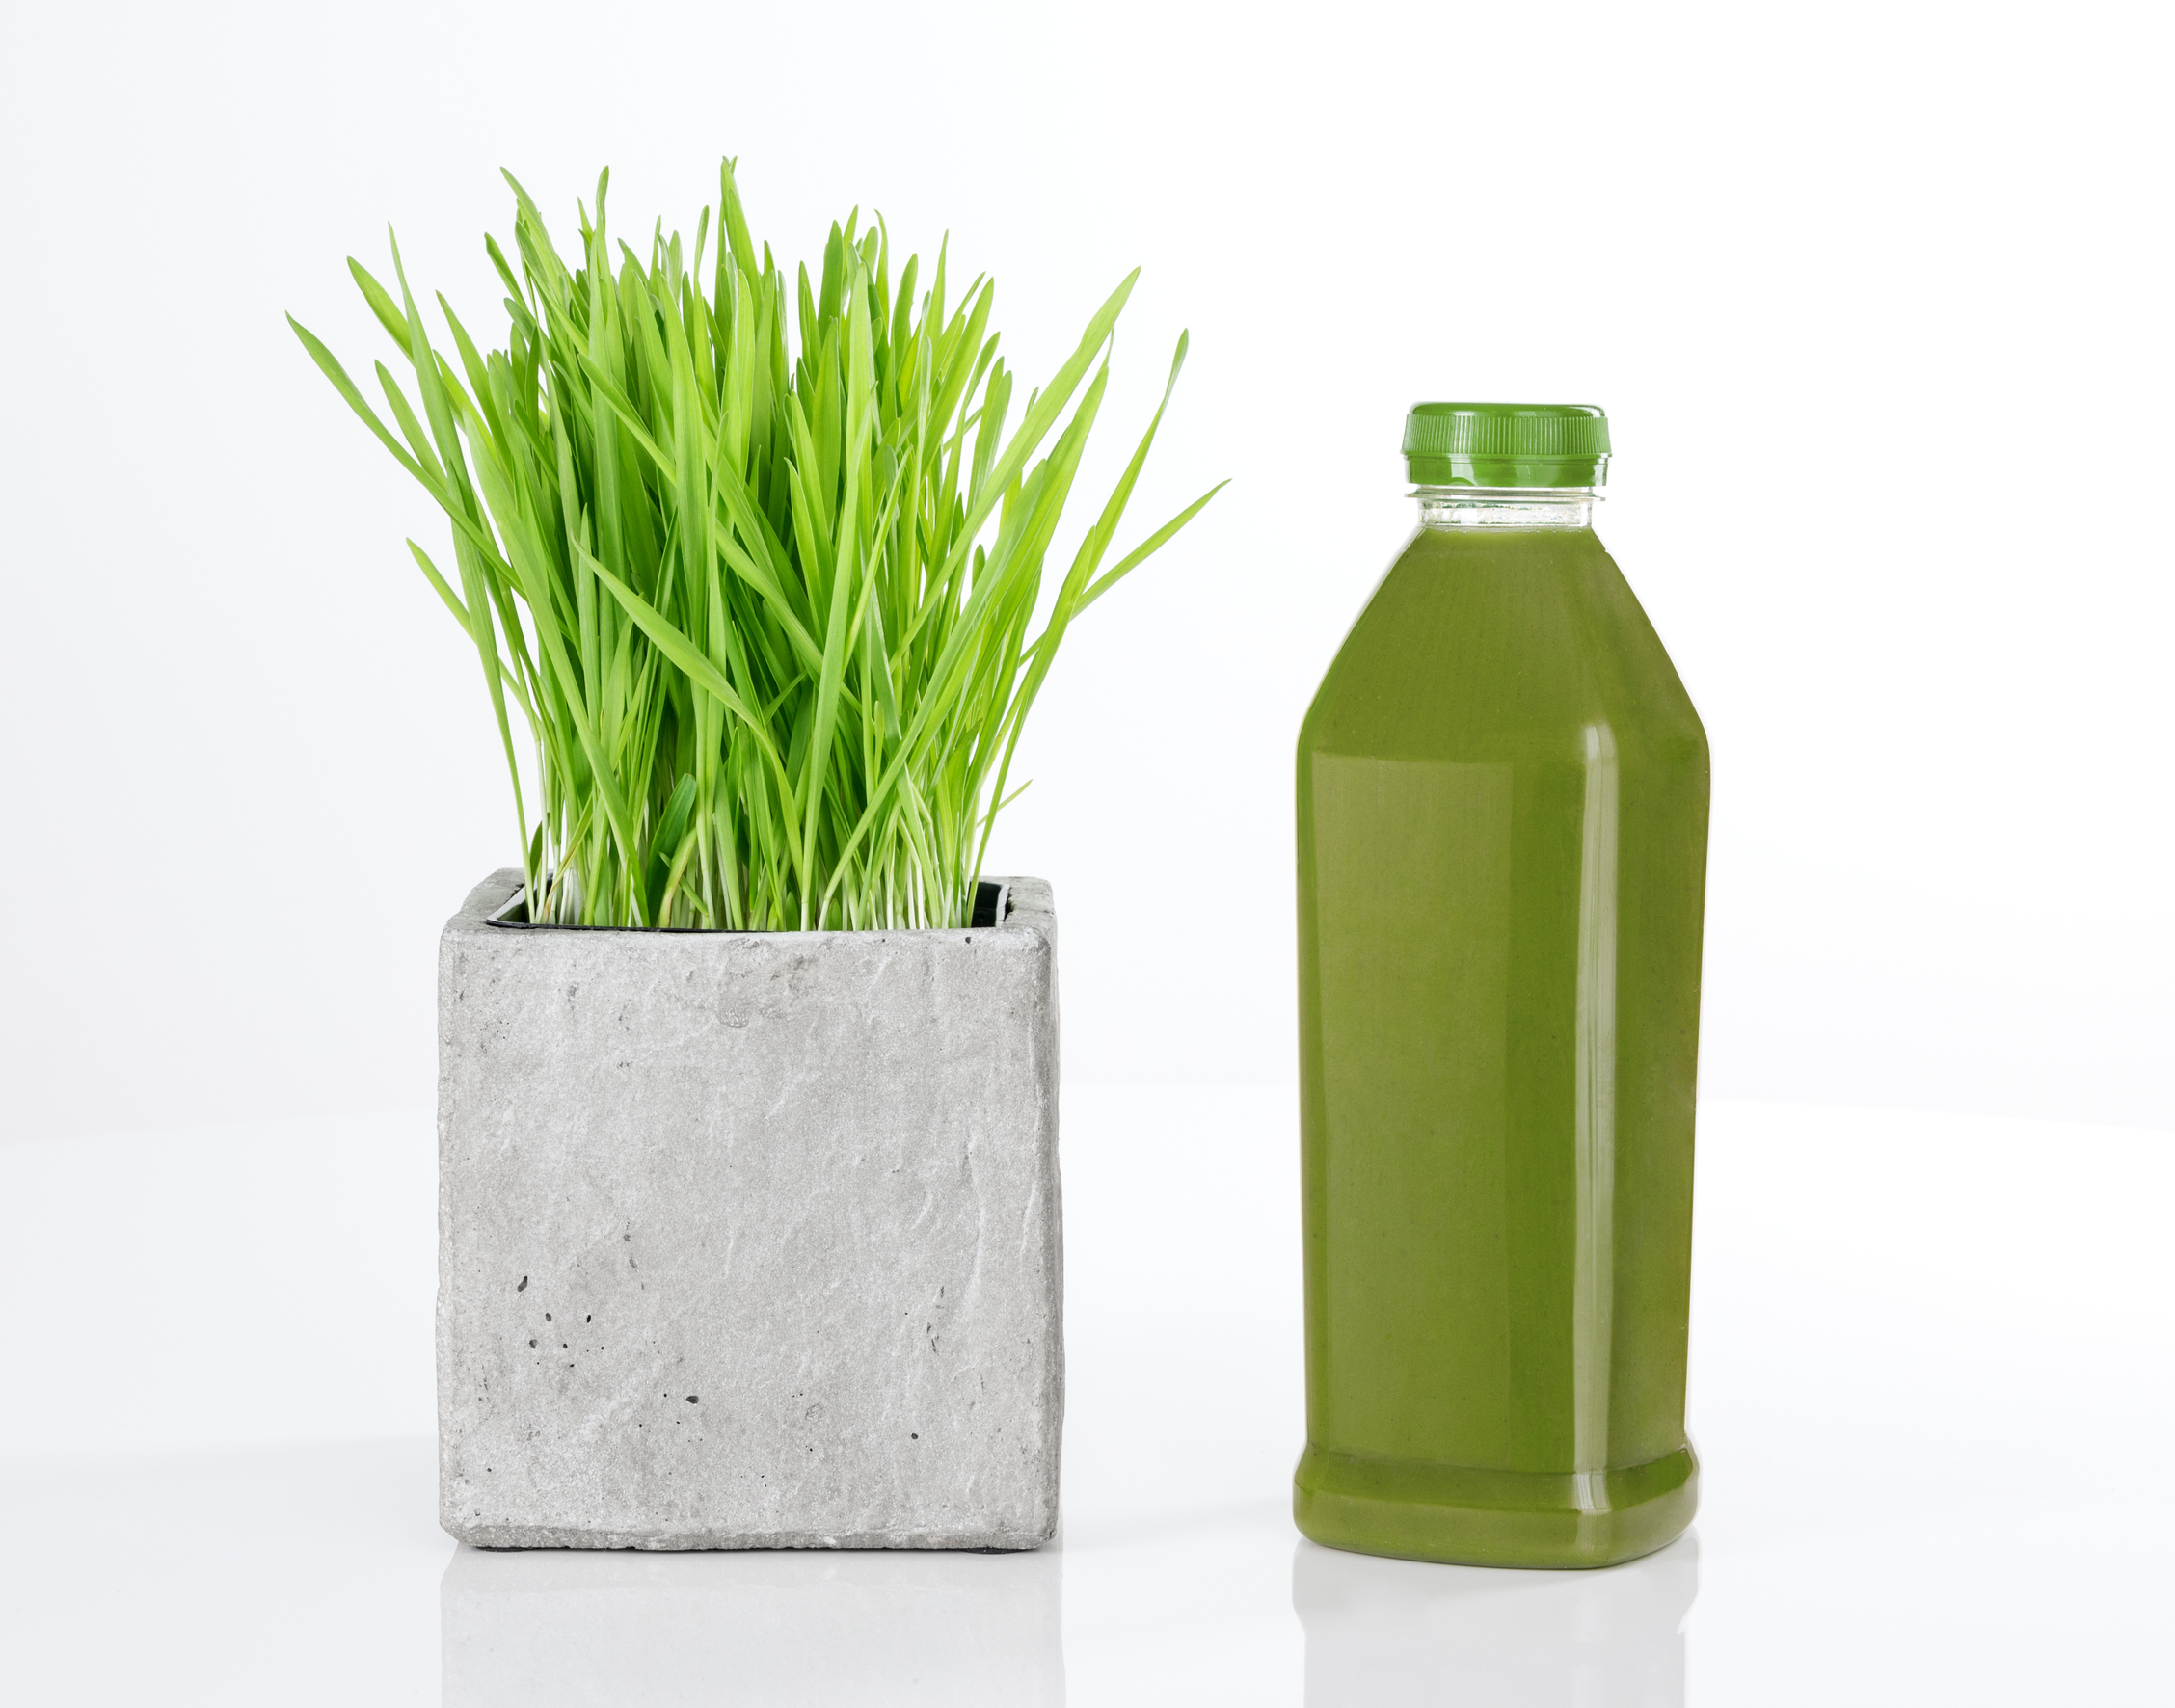 Wheatgrass Juice Benefits Is It Good to Drink Everyday? Nutrition, Daily Intake